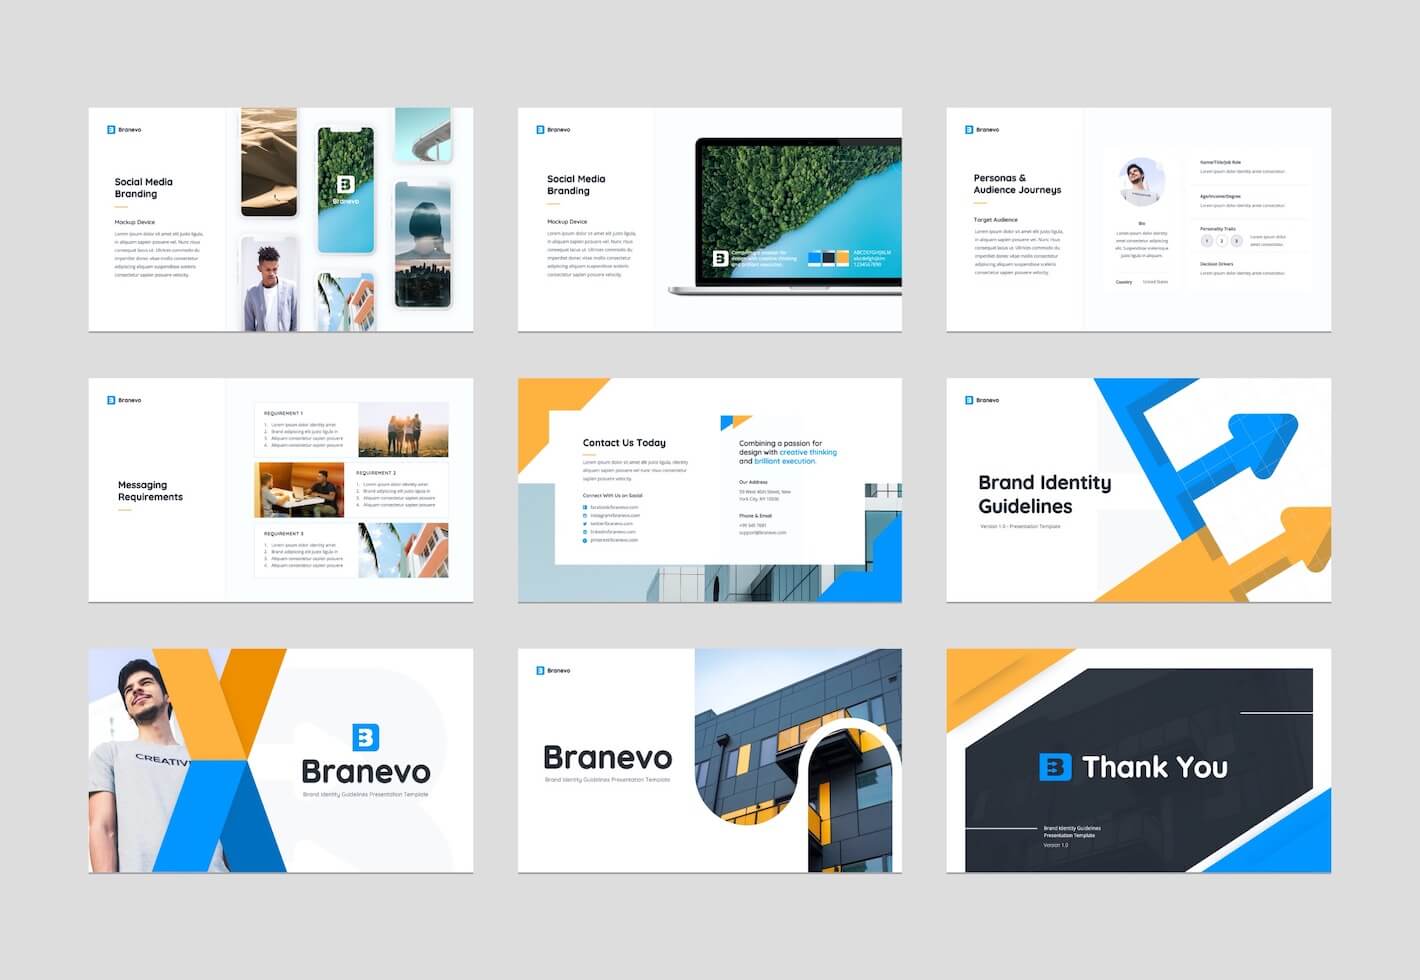 Brand Identity Guidelines PowerPoint Presentation Template FREE Graphue